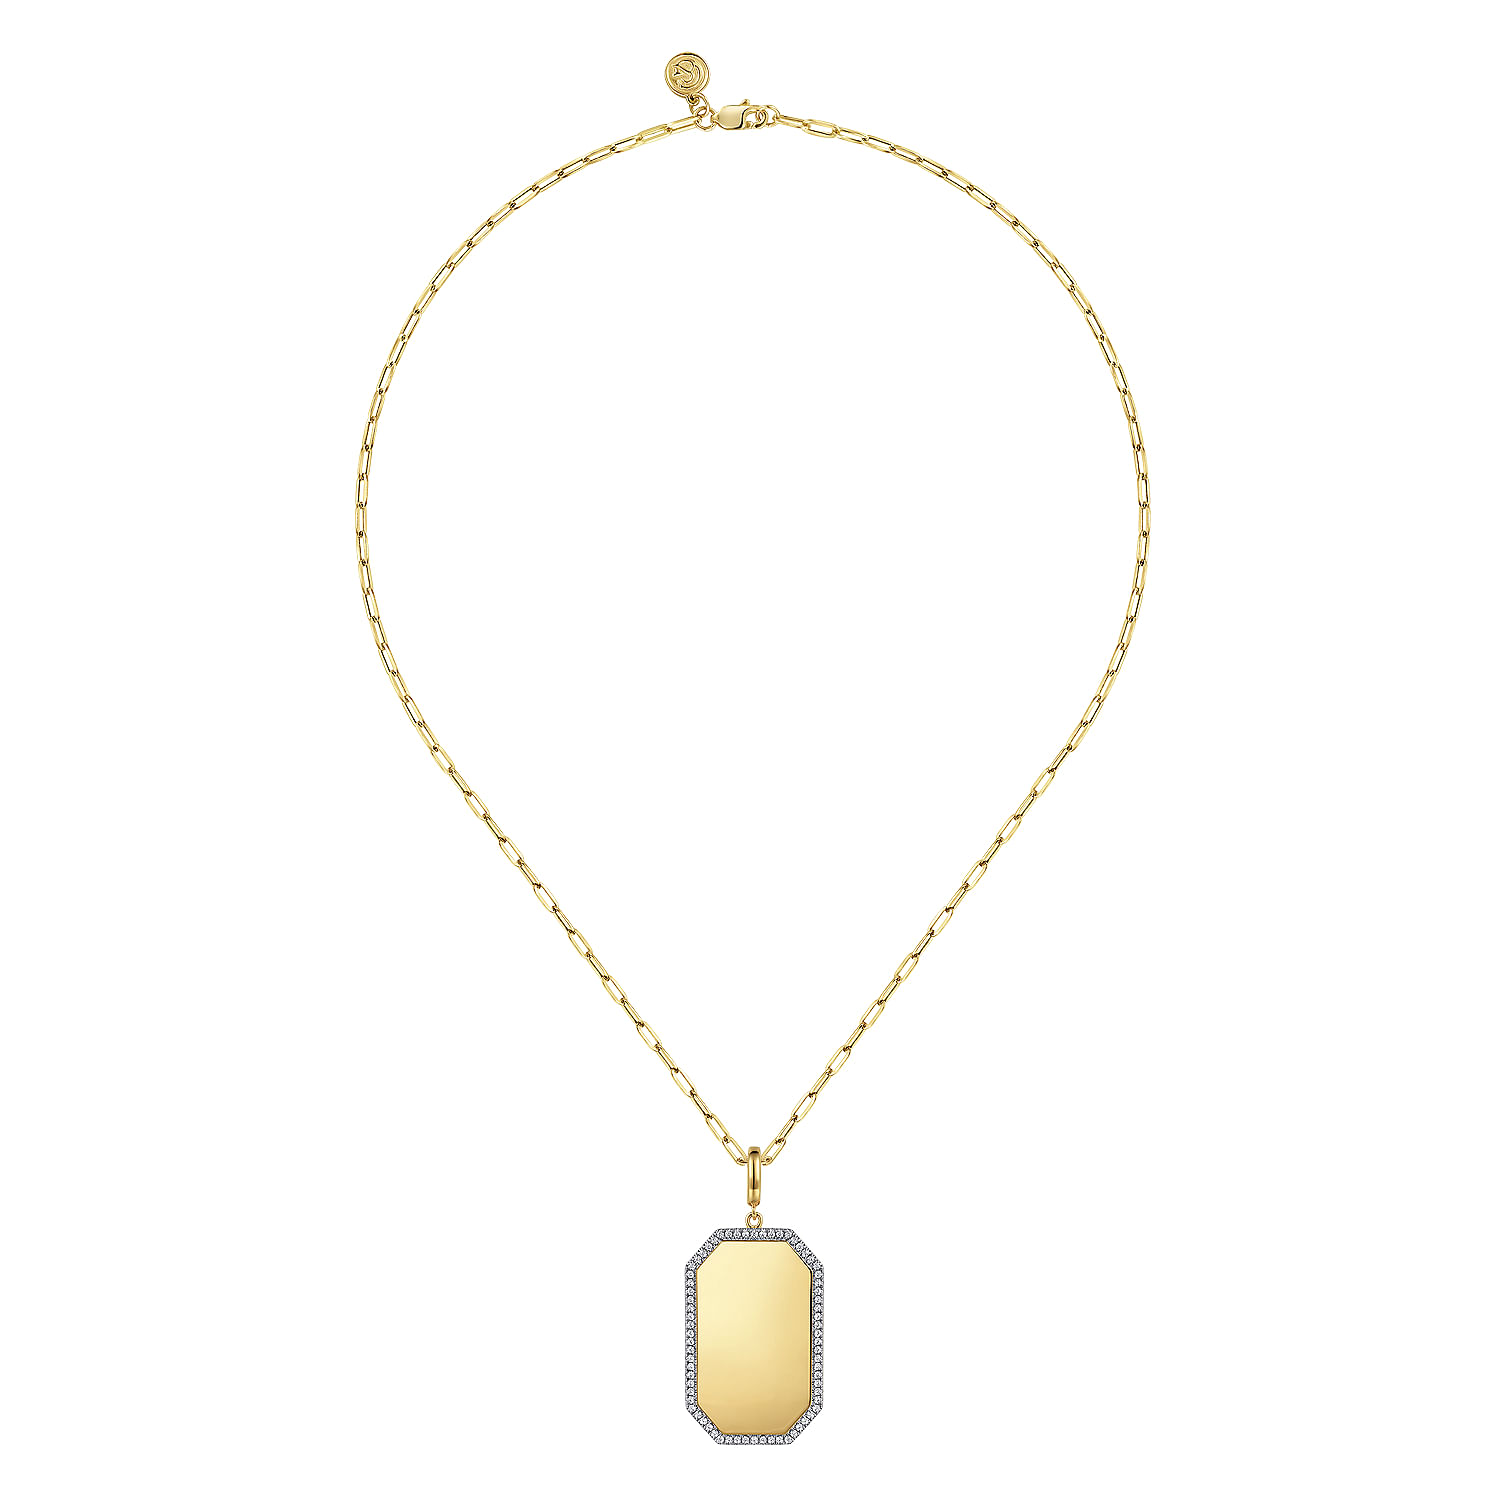 14K Yellow Gold Diamond Personalized Elongated Octagonal Shaped Medallion Pendant Necklace with Hollow Paperclip Chain